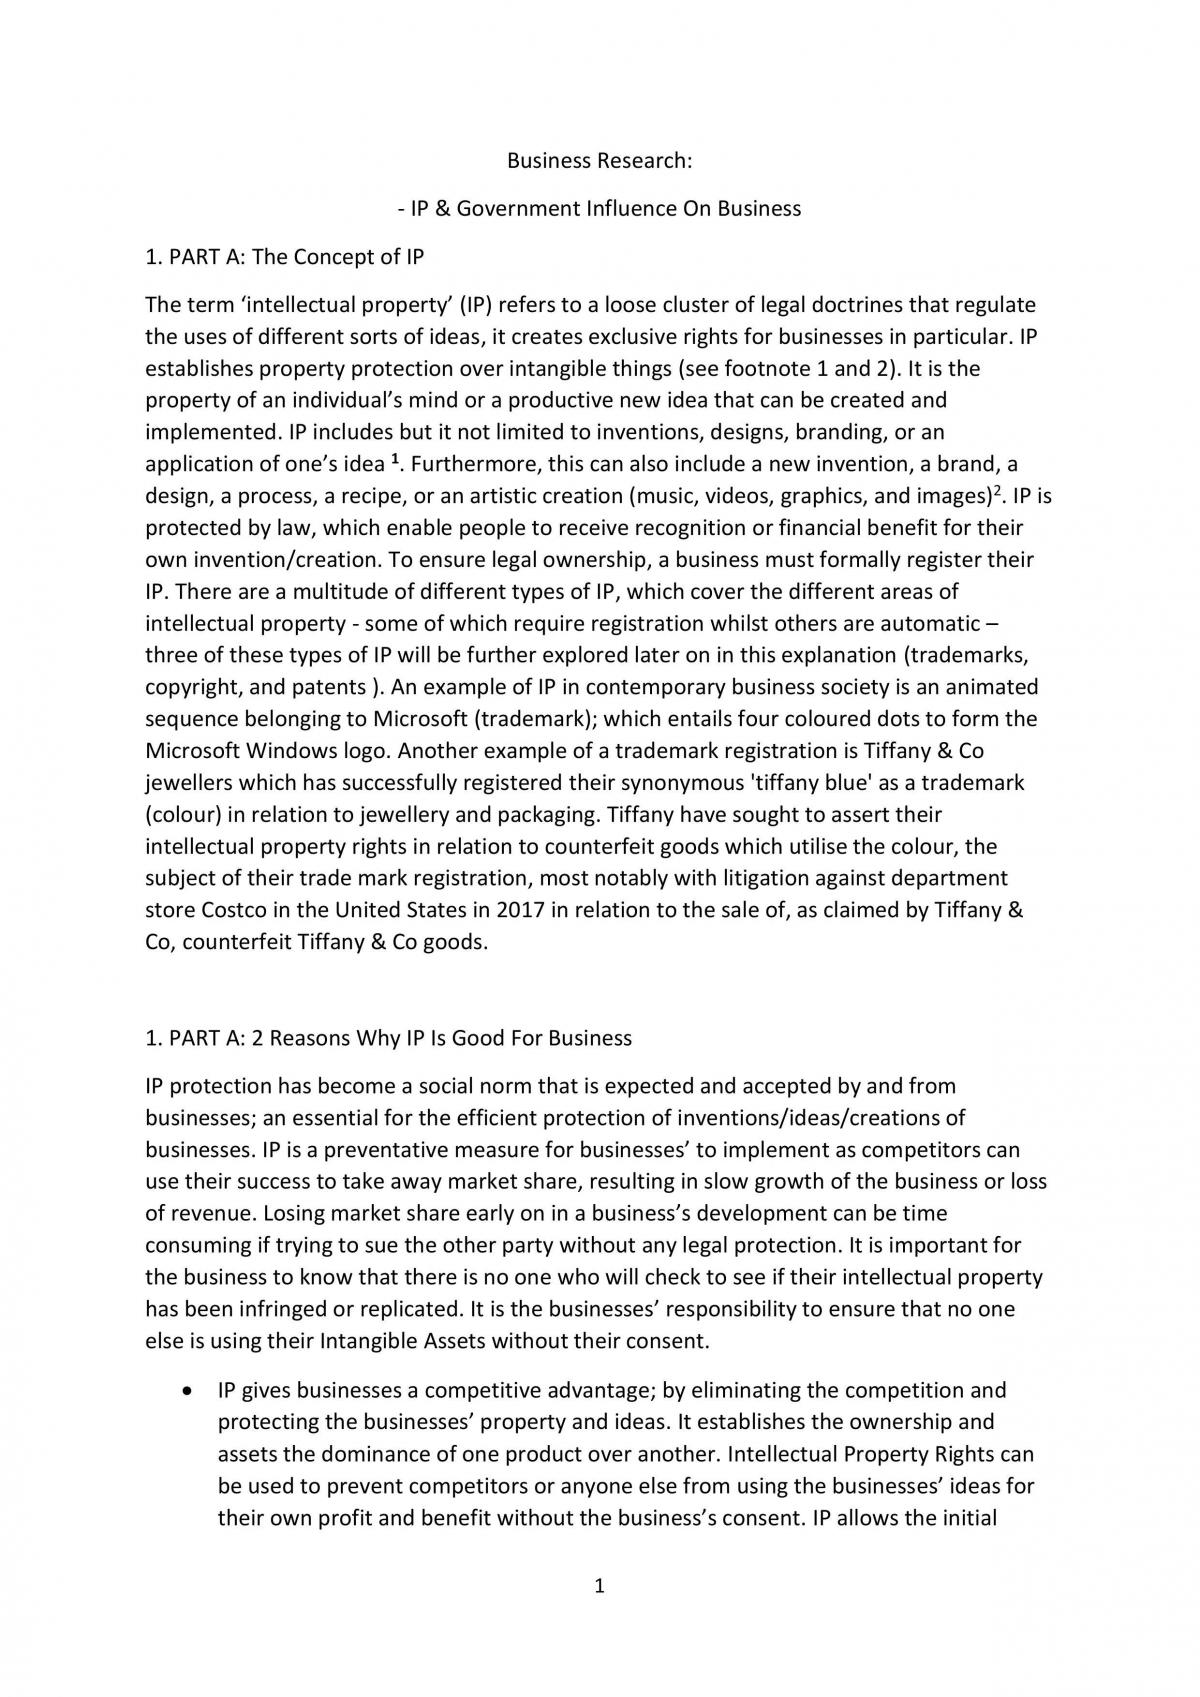 Business Research - Intellectual Property (IP) and Government Influence on Business - Page 1